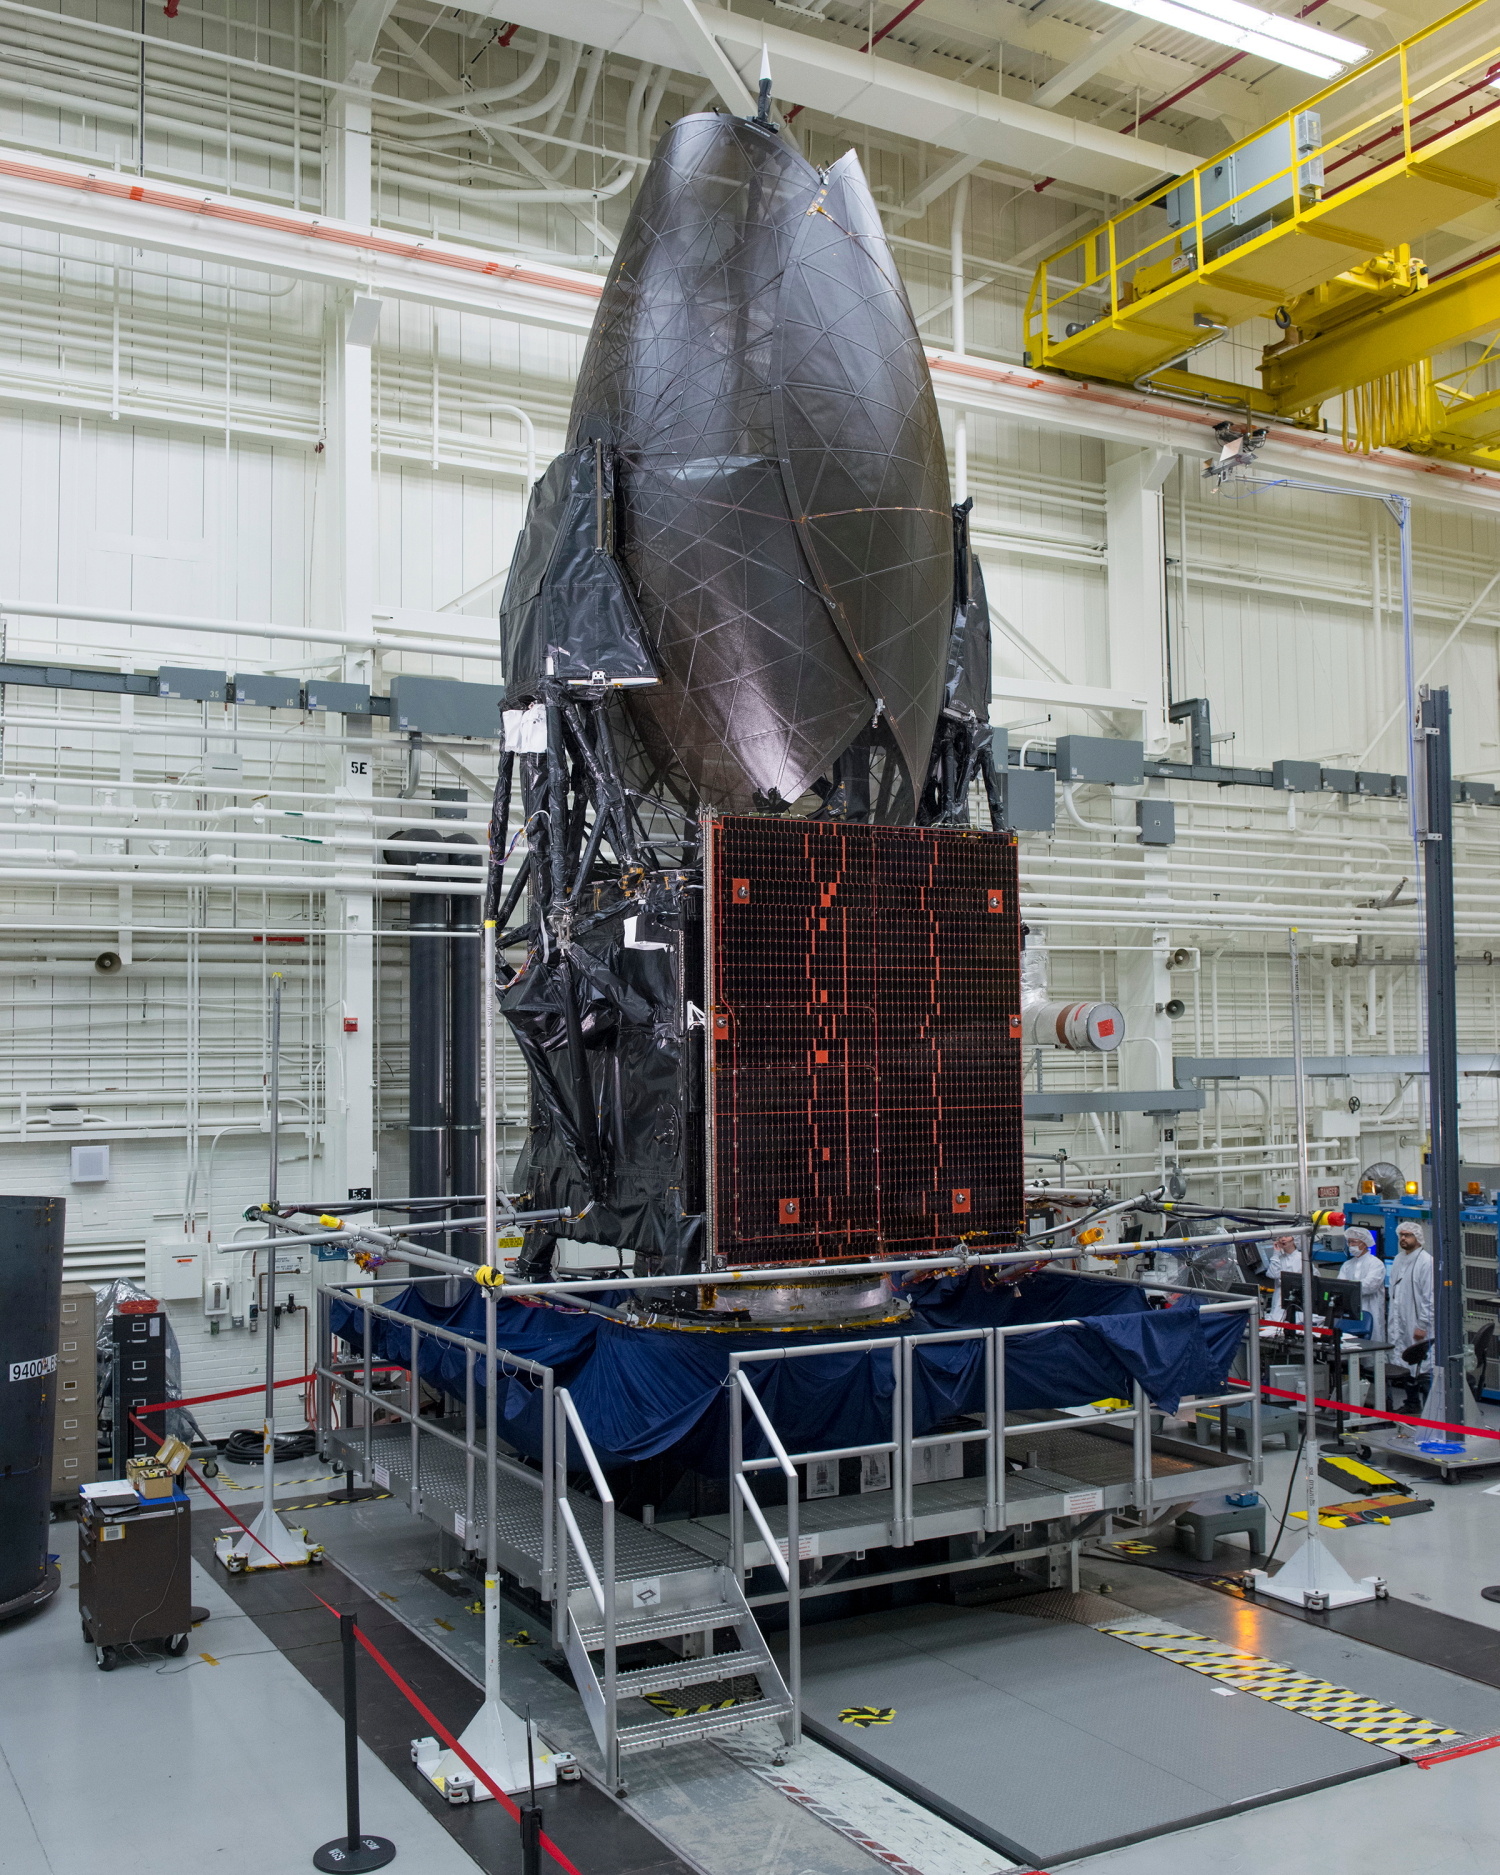 The sixth and final Boeing Tracking and Data Relay Satellite (TDRS), launched on Friday, will enhance NASA’s space communications network when the satellite becomes fully operational early next year.. Click to enlarge.